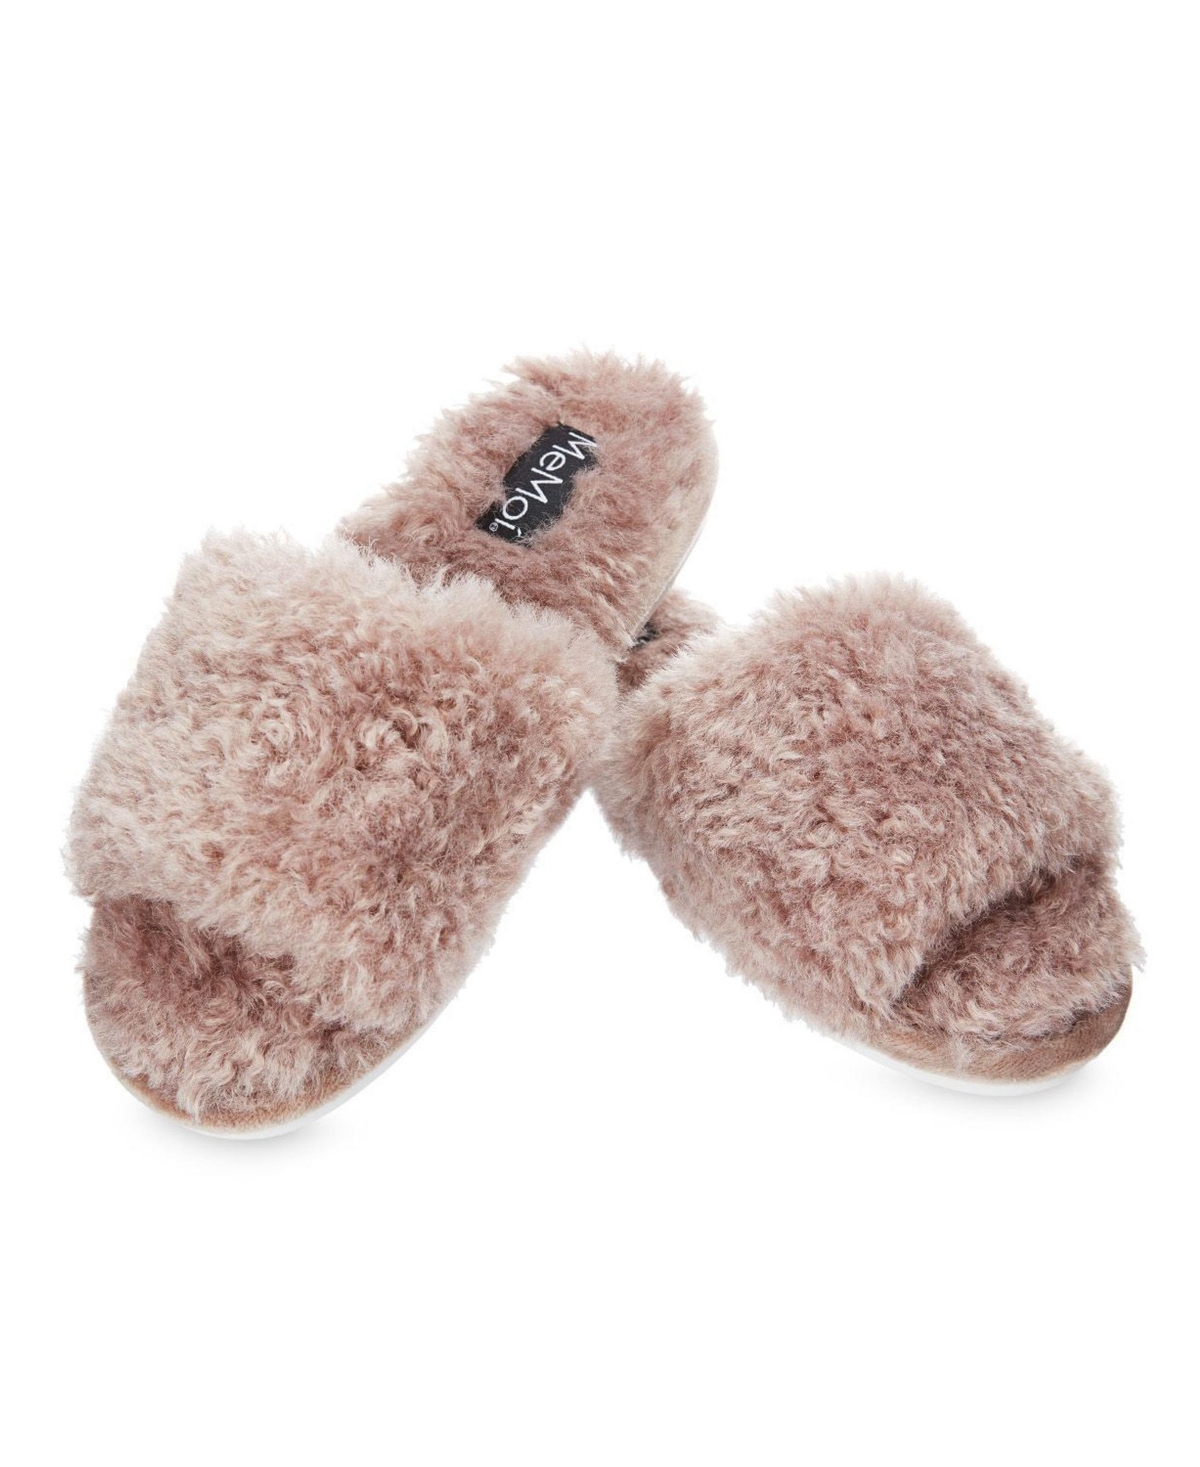 Women's Jacqueline Plush Slippers - Taupe